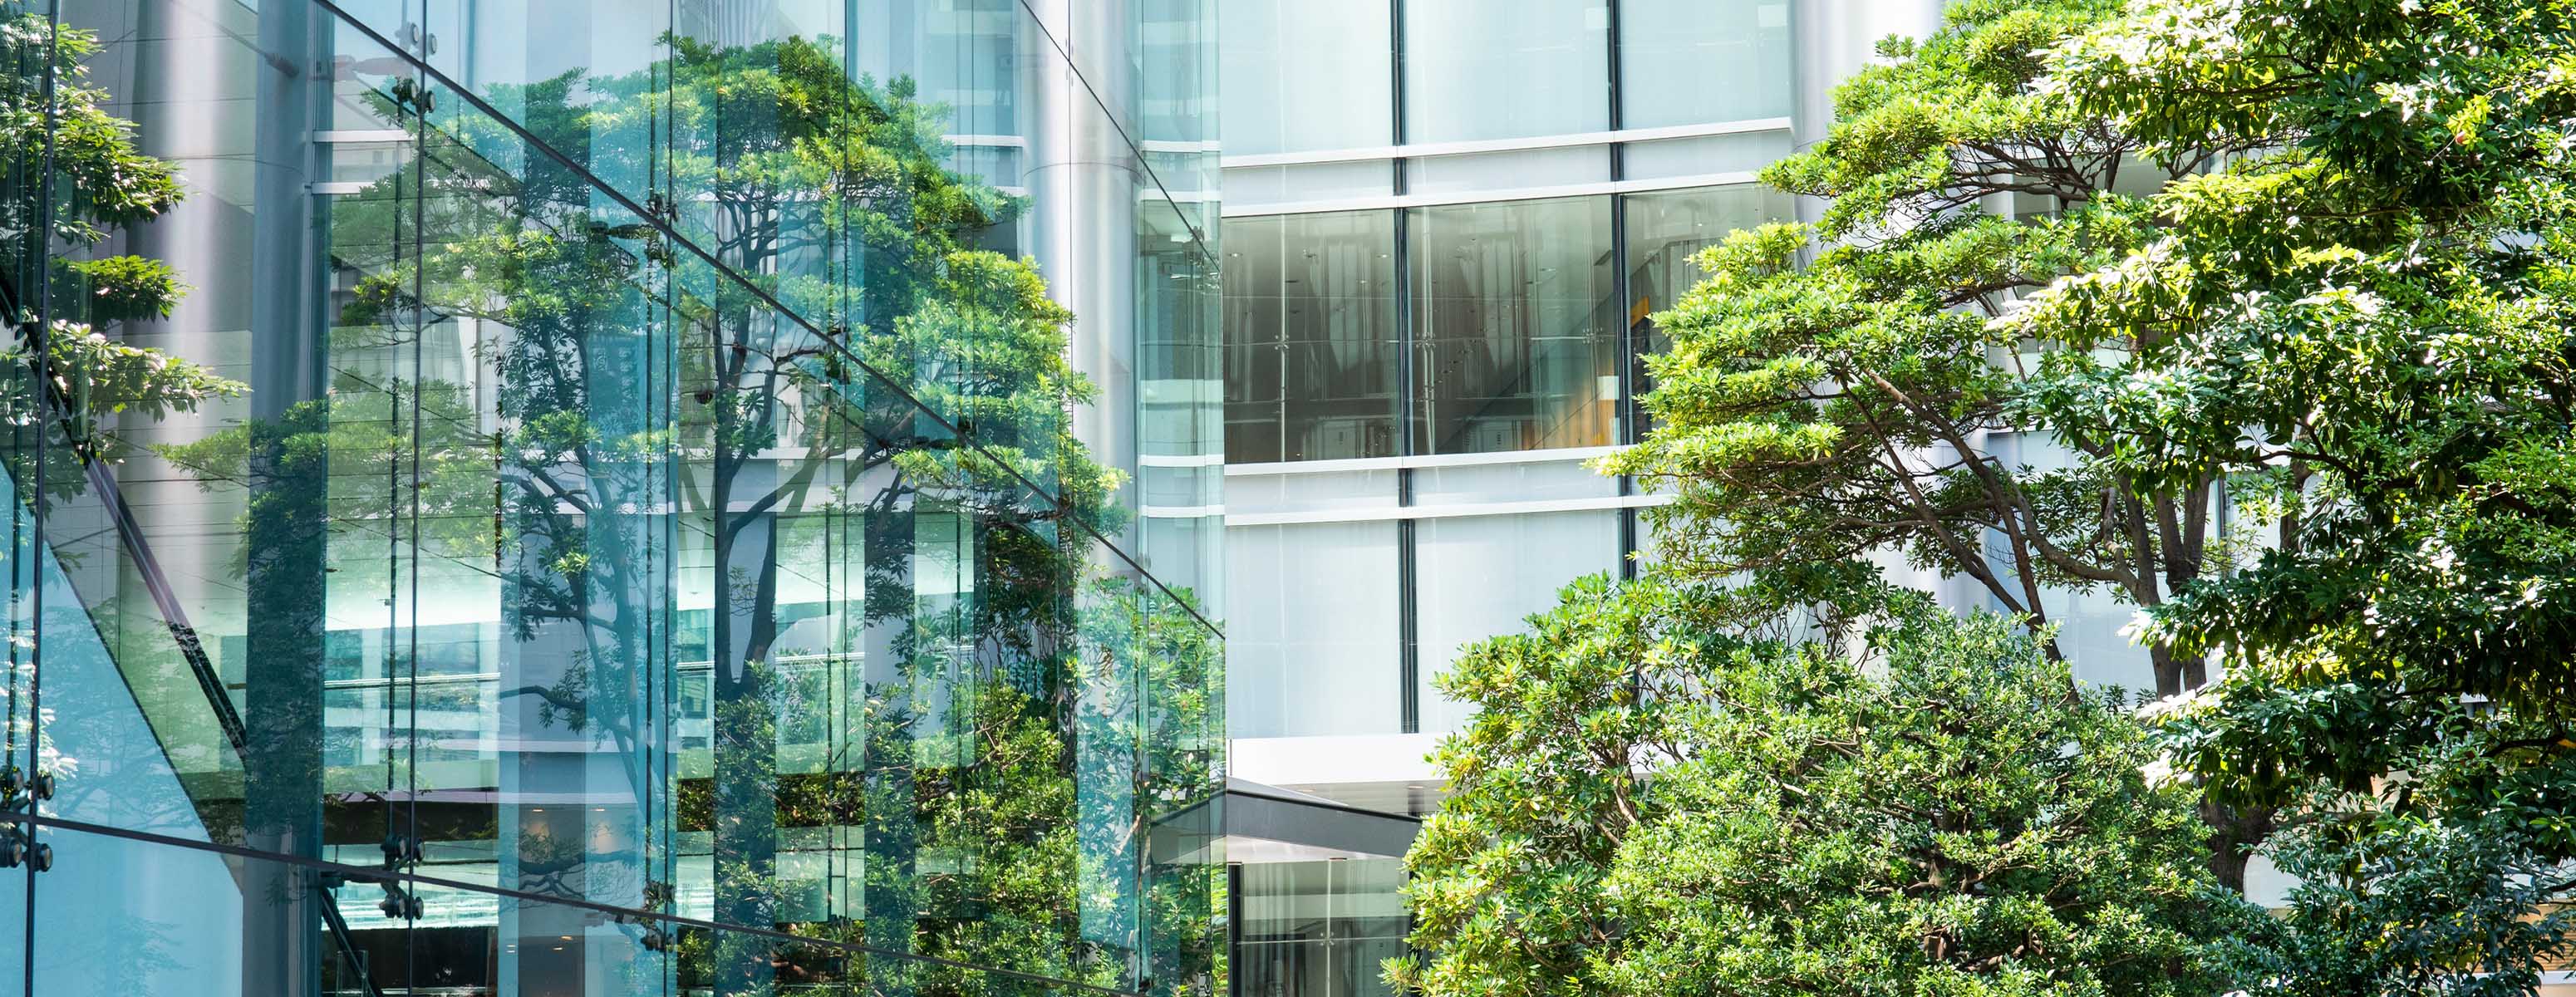 A tree reflected in the windows of a glass office building